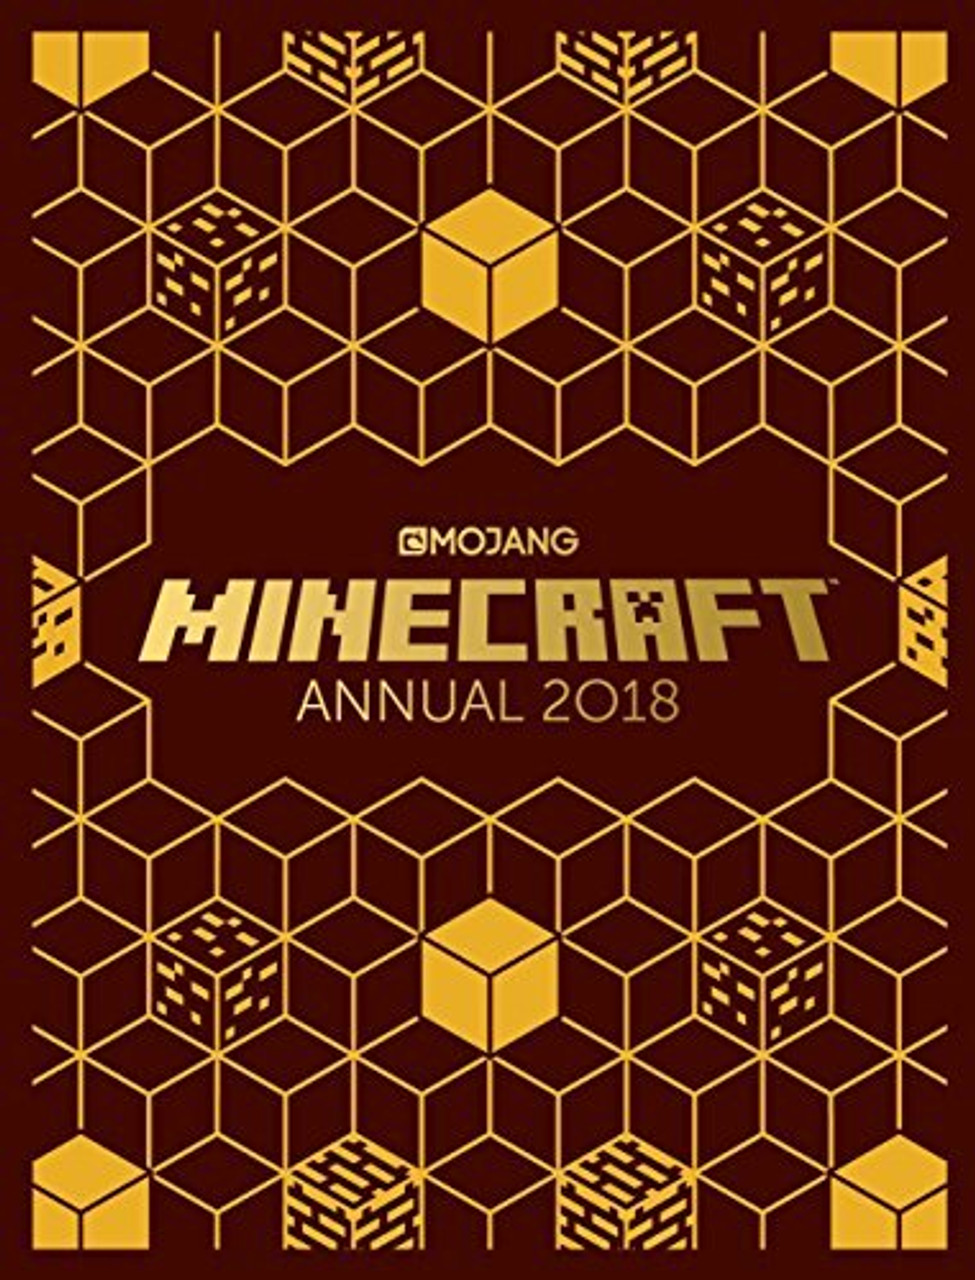 The Official Minecraft Annual 2018: An official Minecraft book from Mojang (Children's Coffee Table book)